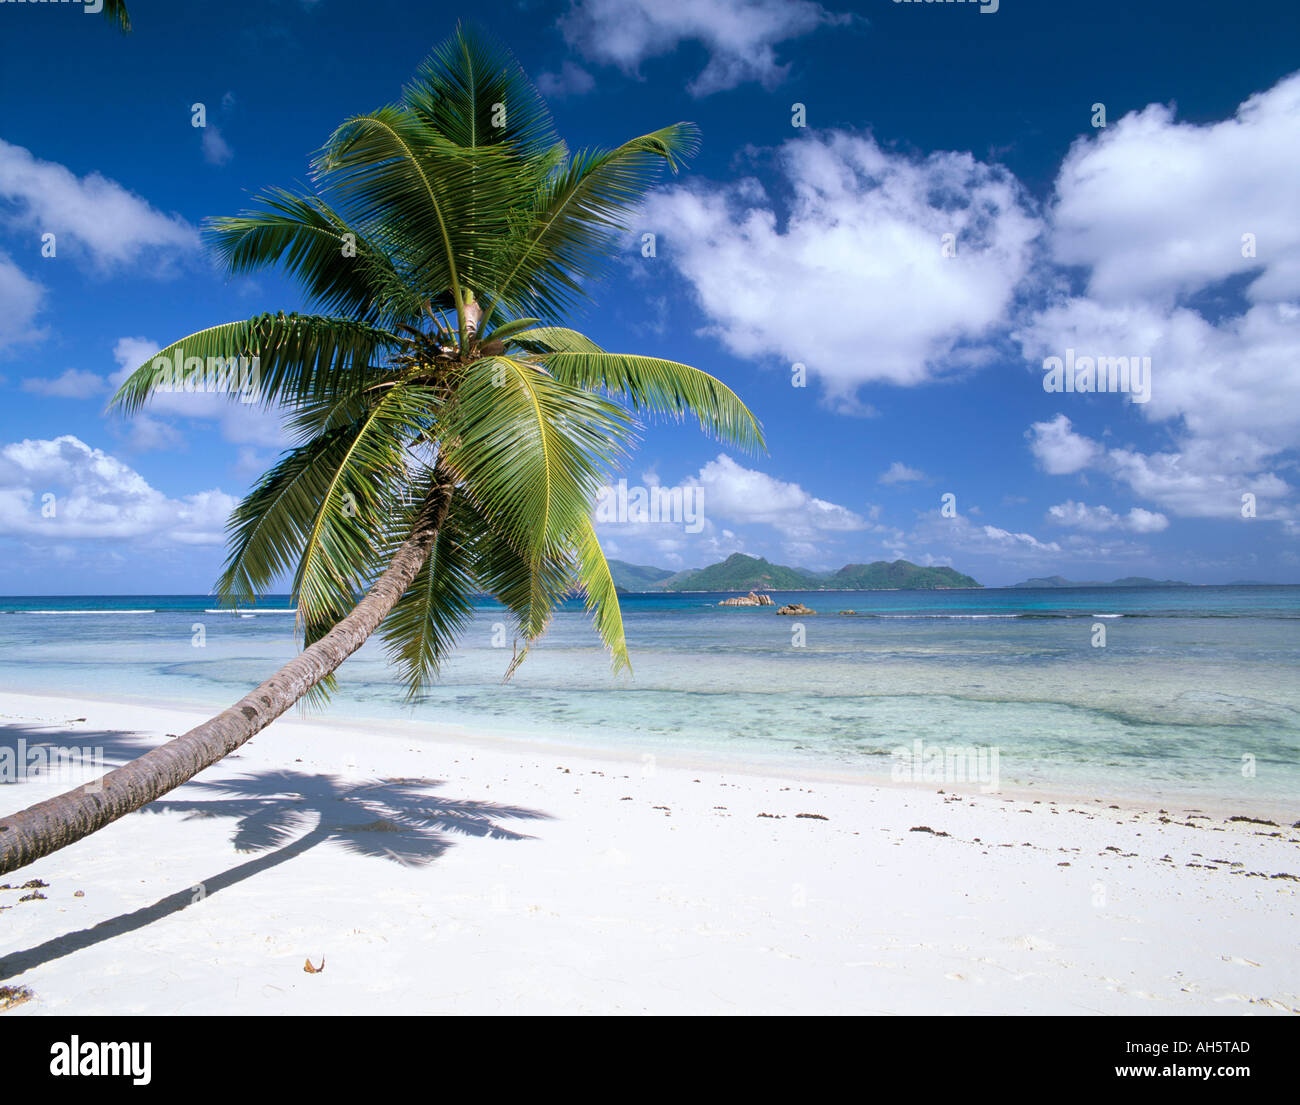 Leaning palm tree beach Anse Severe island of La Digue Seychelles Indian Ocean Africa Photo -